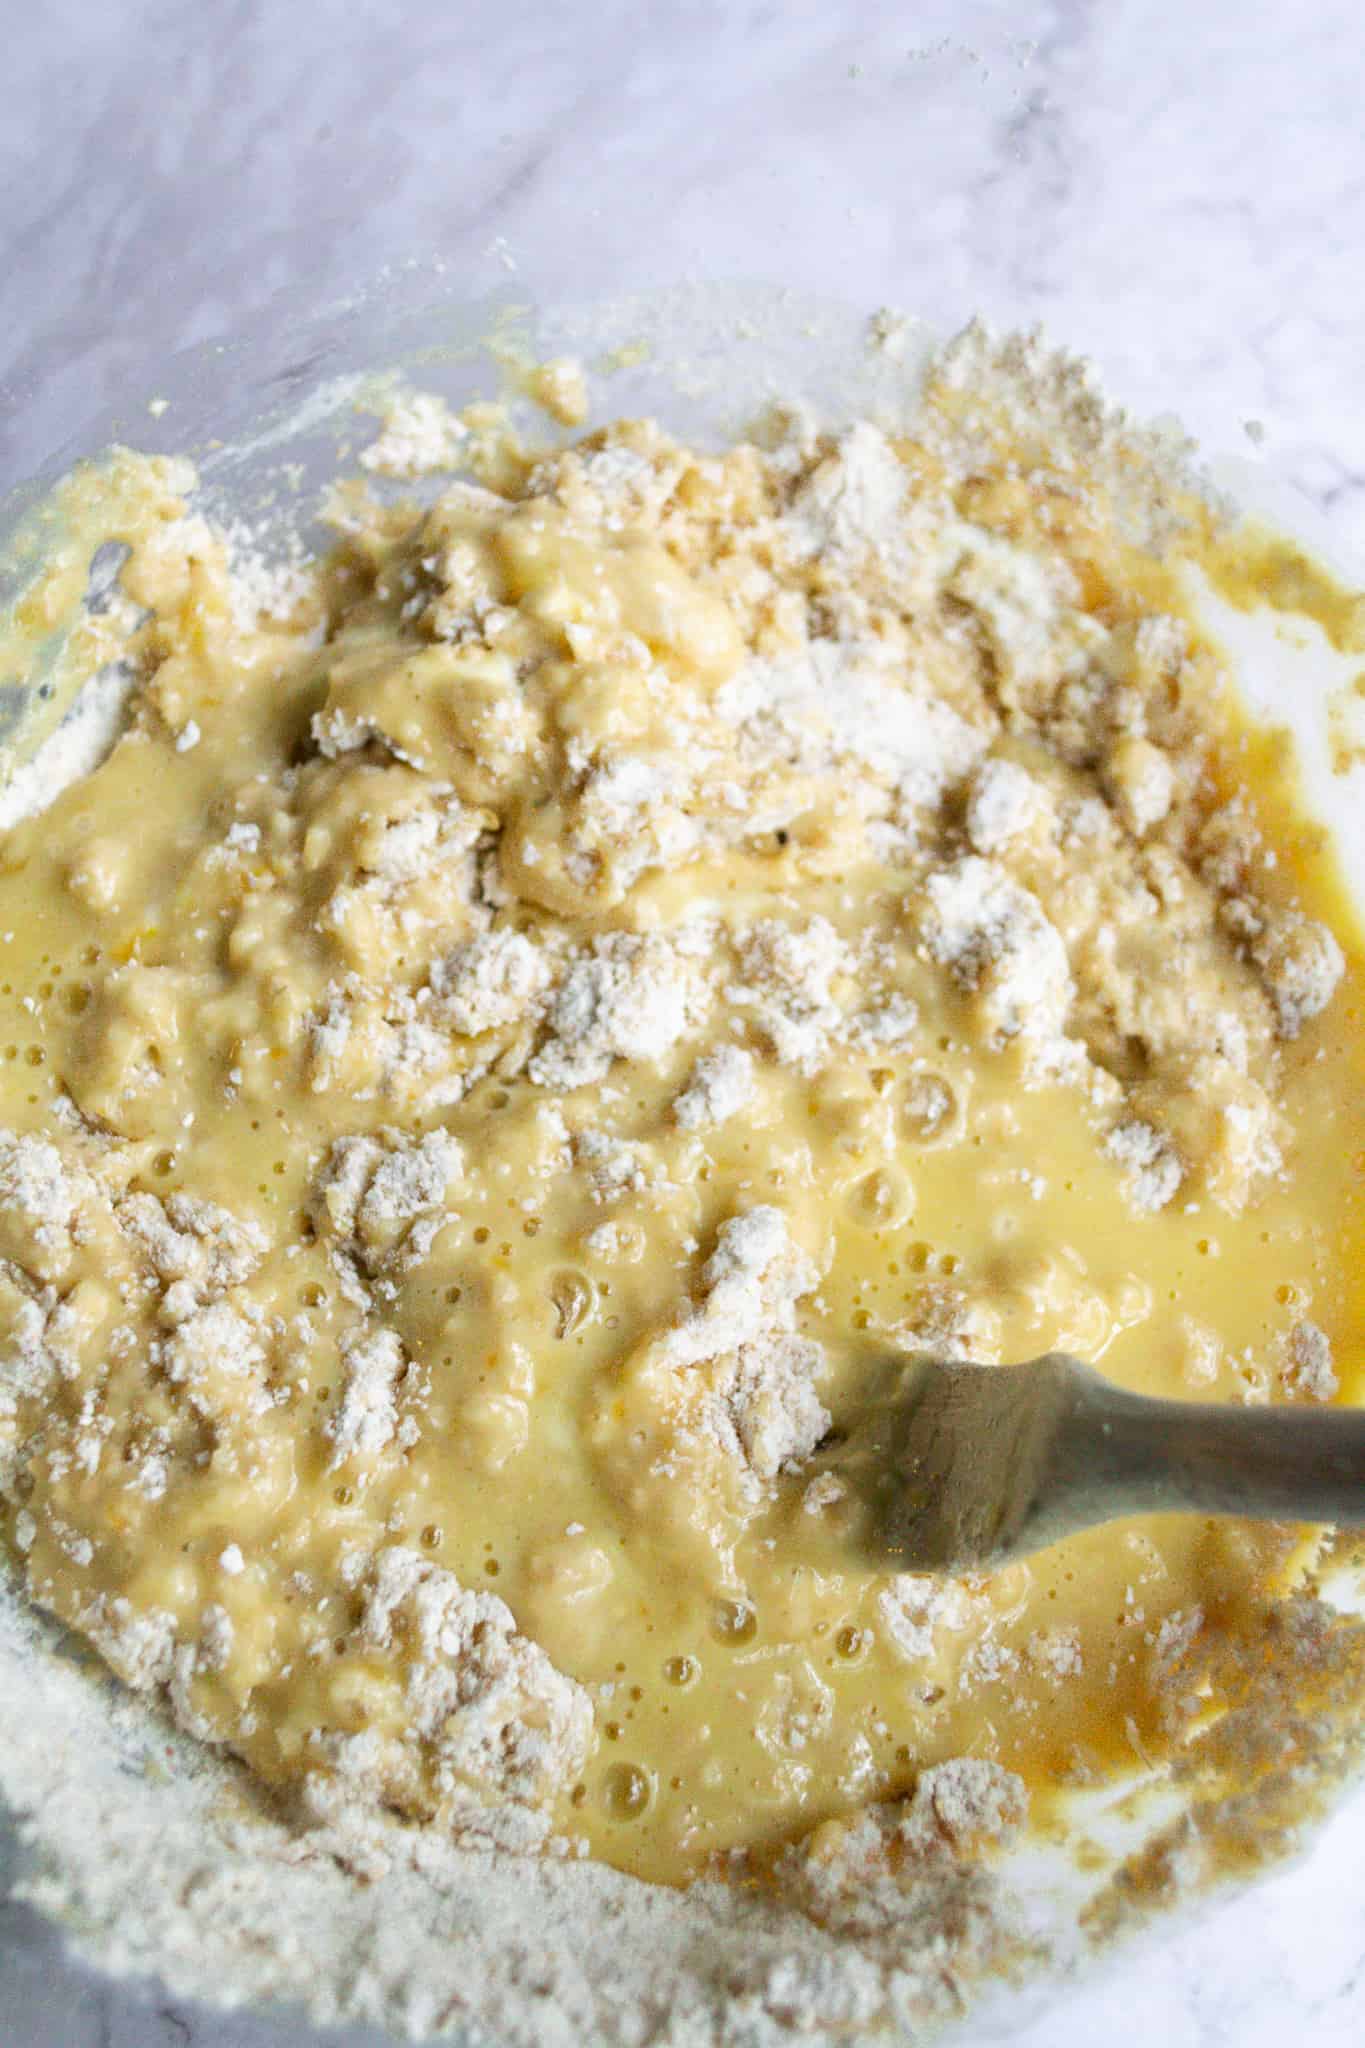 Dry and wet ingredients being mixed for bread in a bowl.